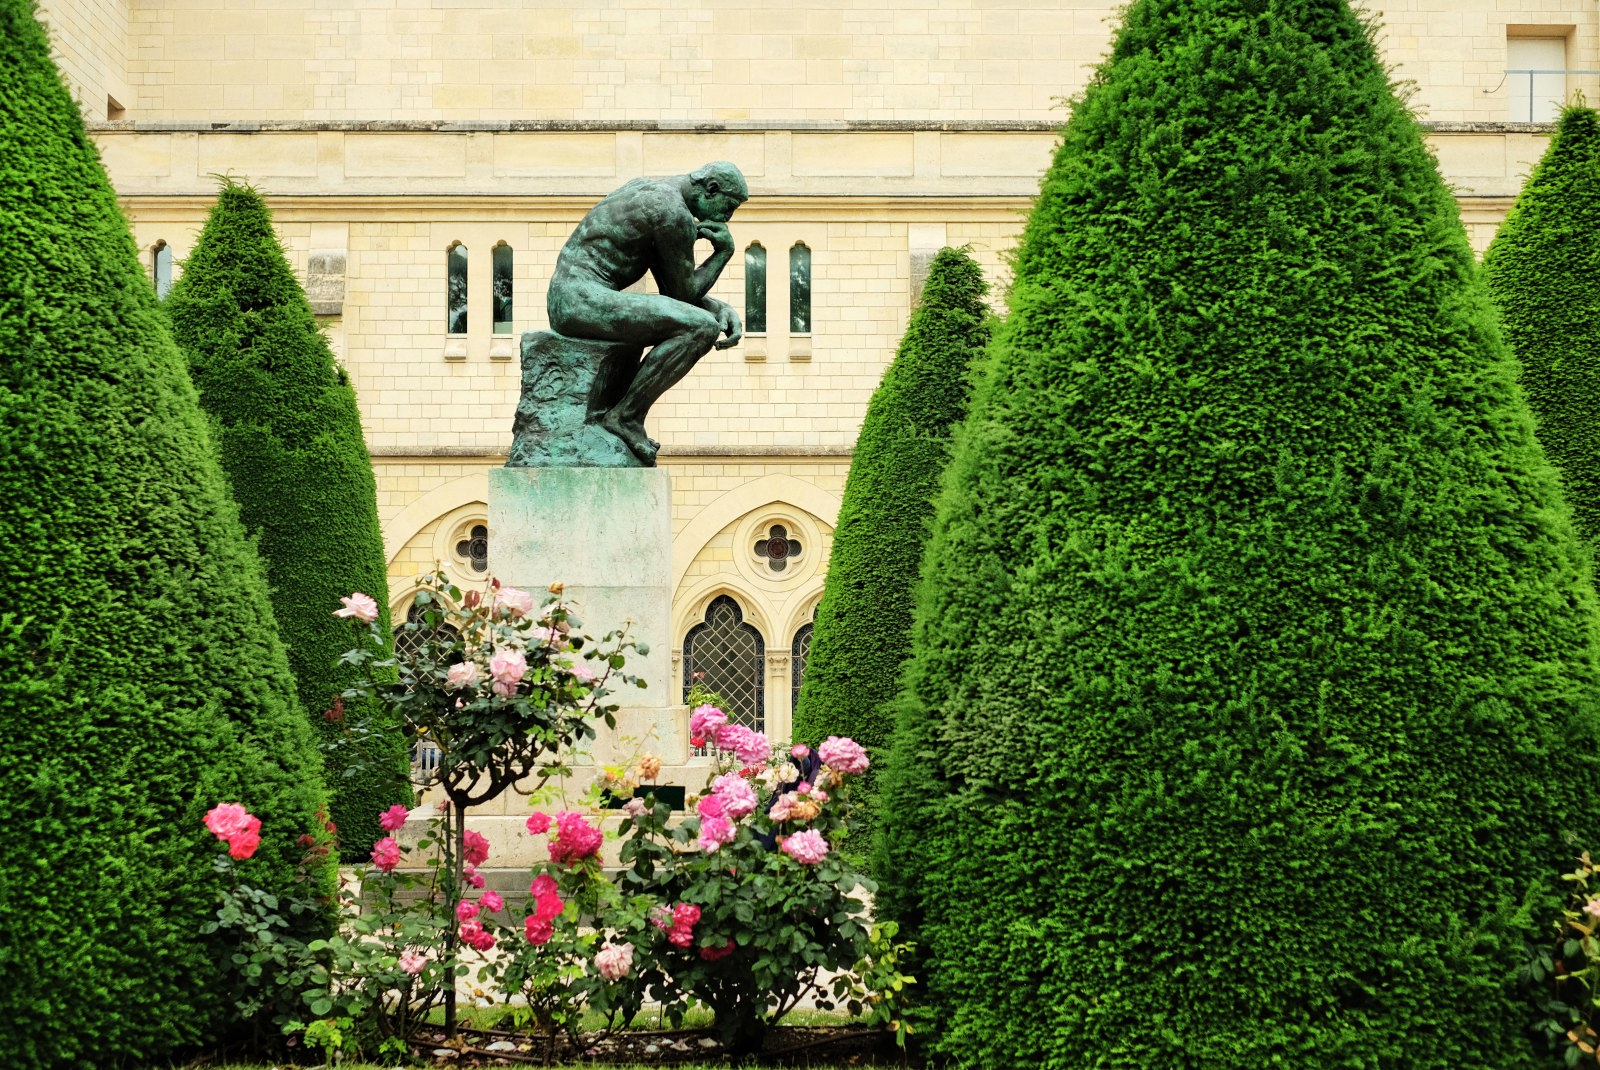 'The Thinker' sculpture, gardens and shrubbery, Musée Rodin, Paris, France. Travel and lifestyle photography by Kent Johnson.